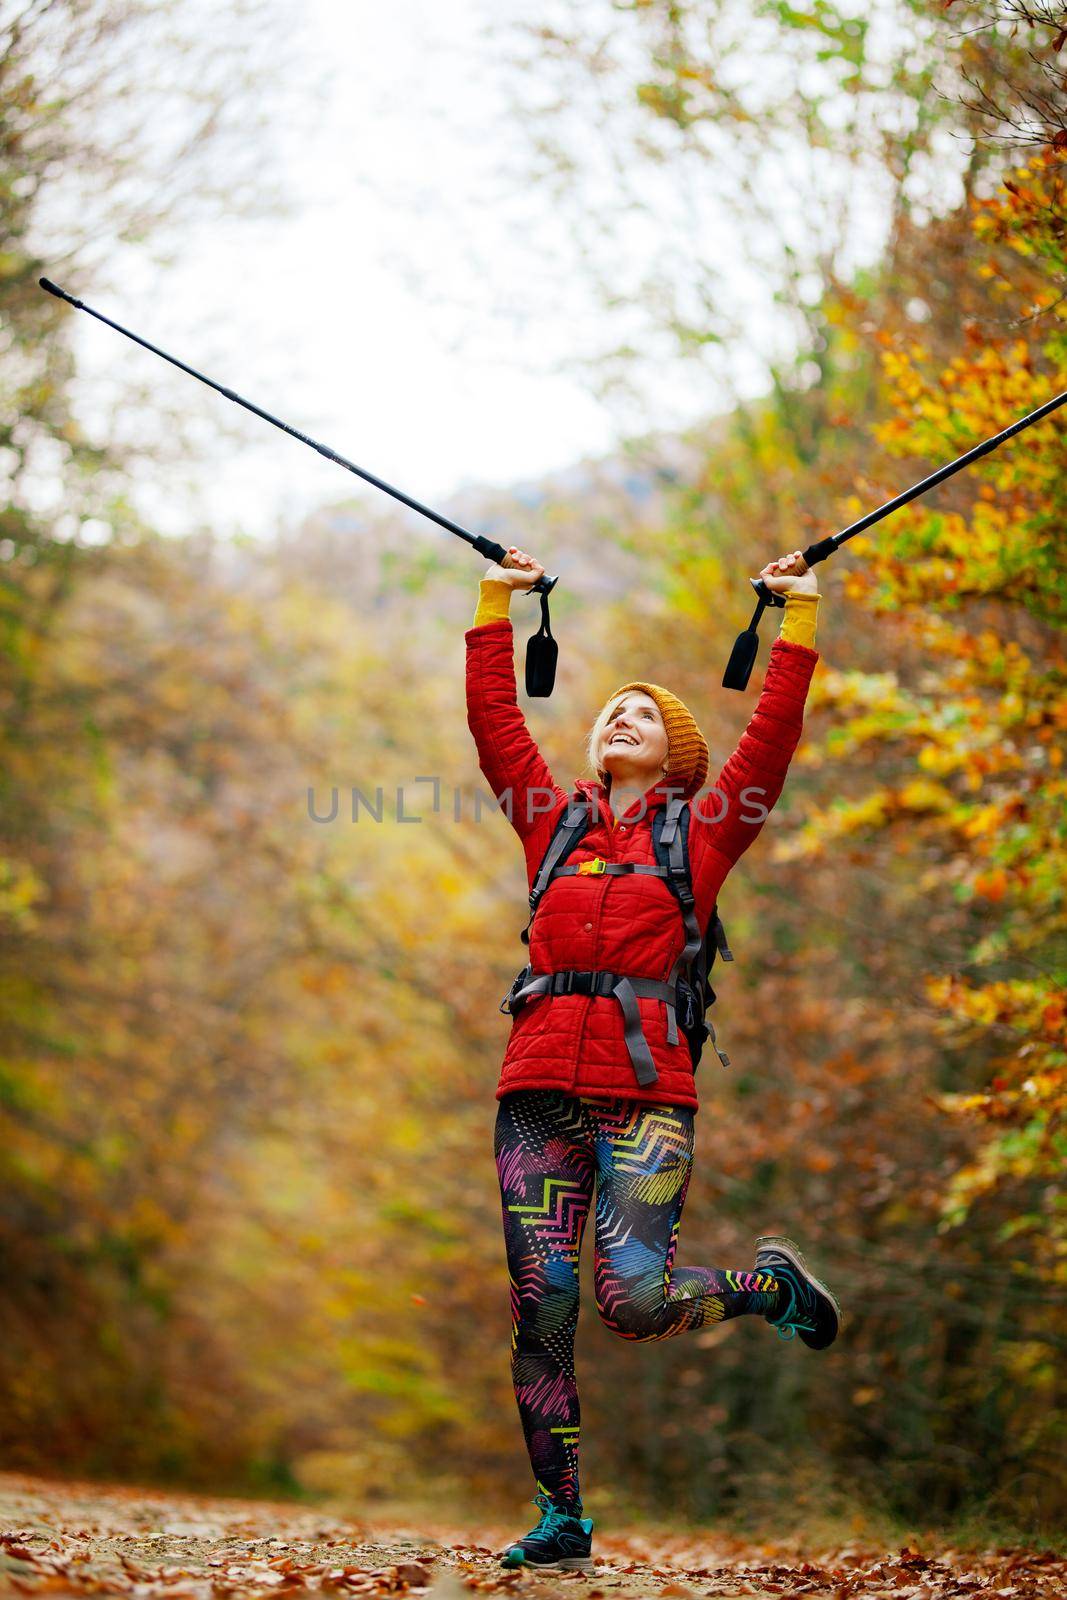 Hiking girl with poles and backpack on a trail. Hands up enjoying in nature. Travel and healthy lifestyle outdoors in fall season.